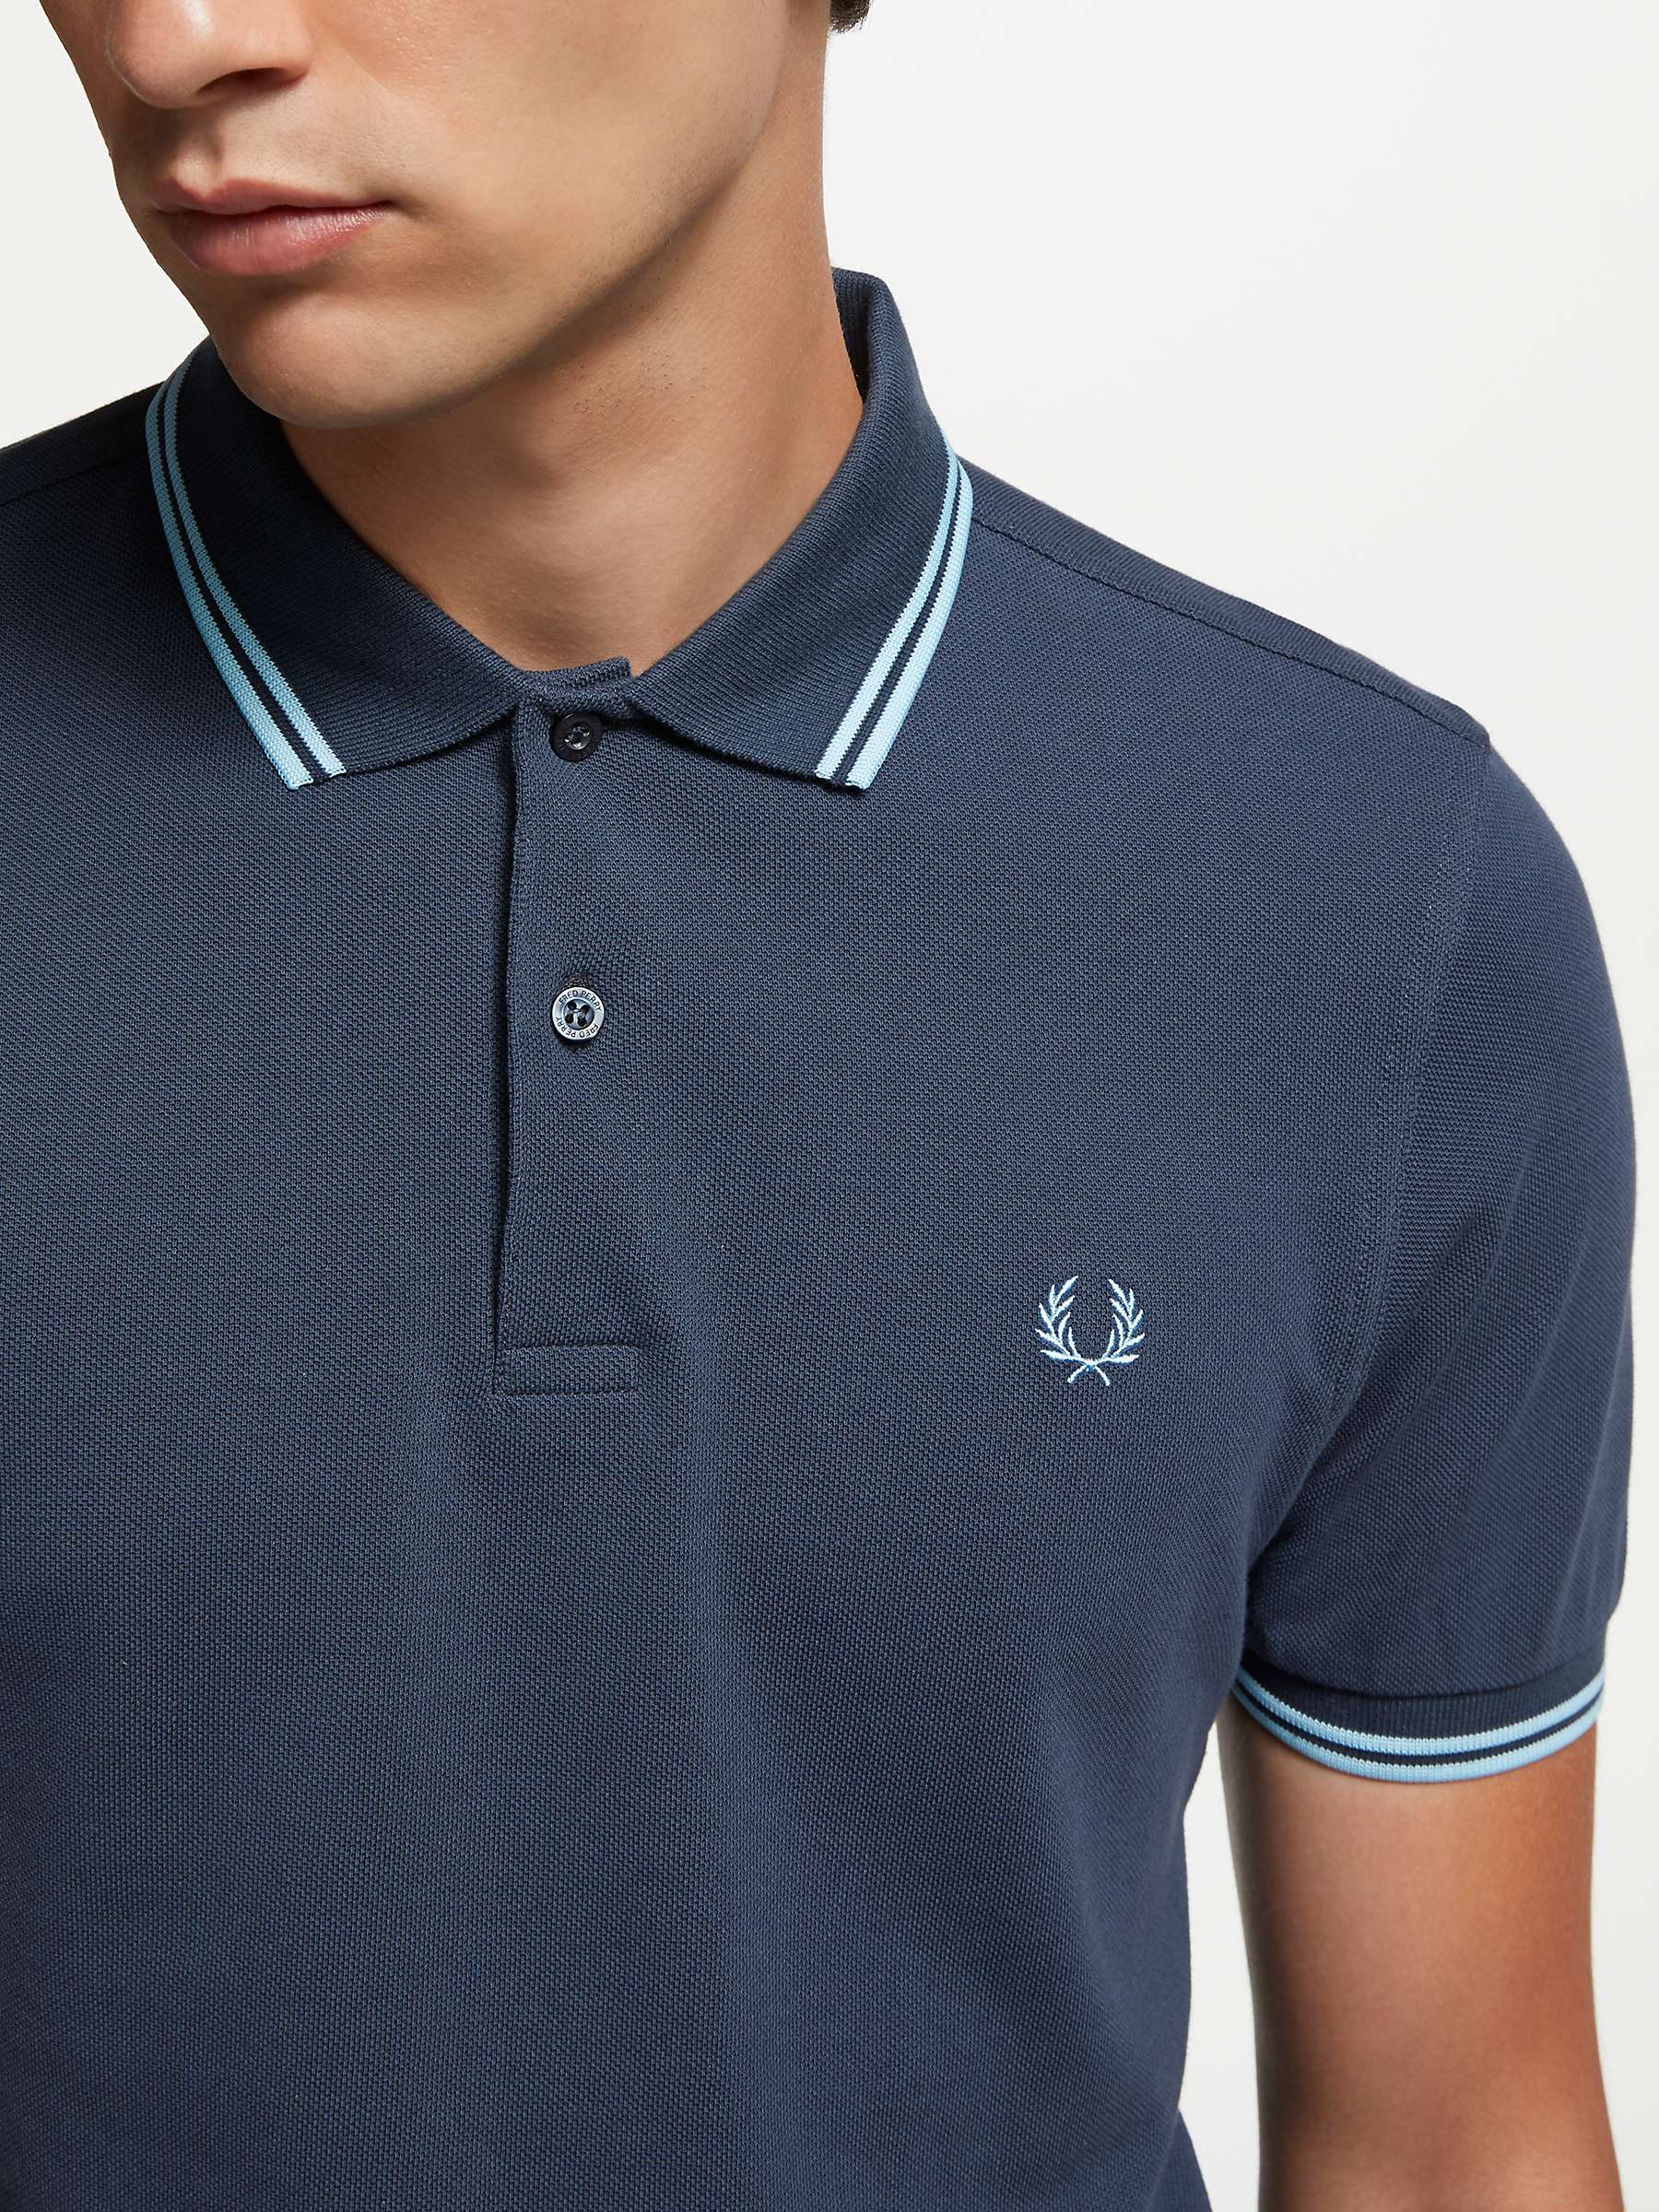 Buy Fred Perry Twin Tipped Regular Fit Polo Shirt, Dark Airforce Online at johnlewis.com